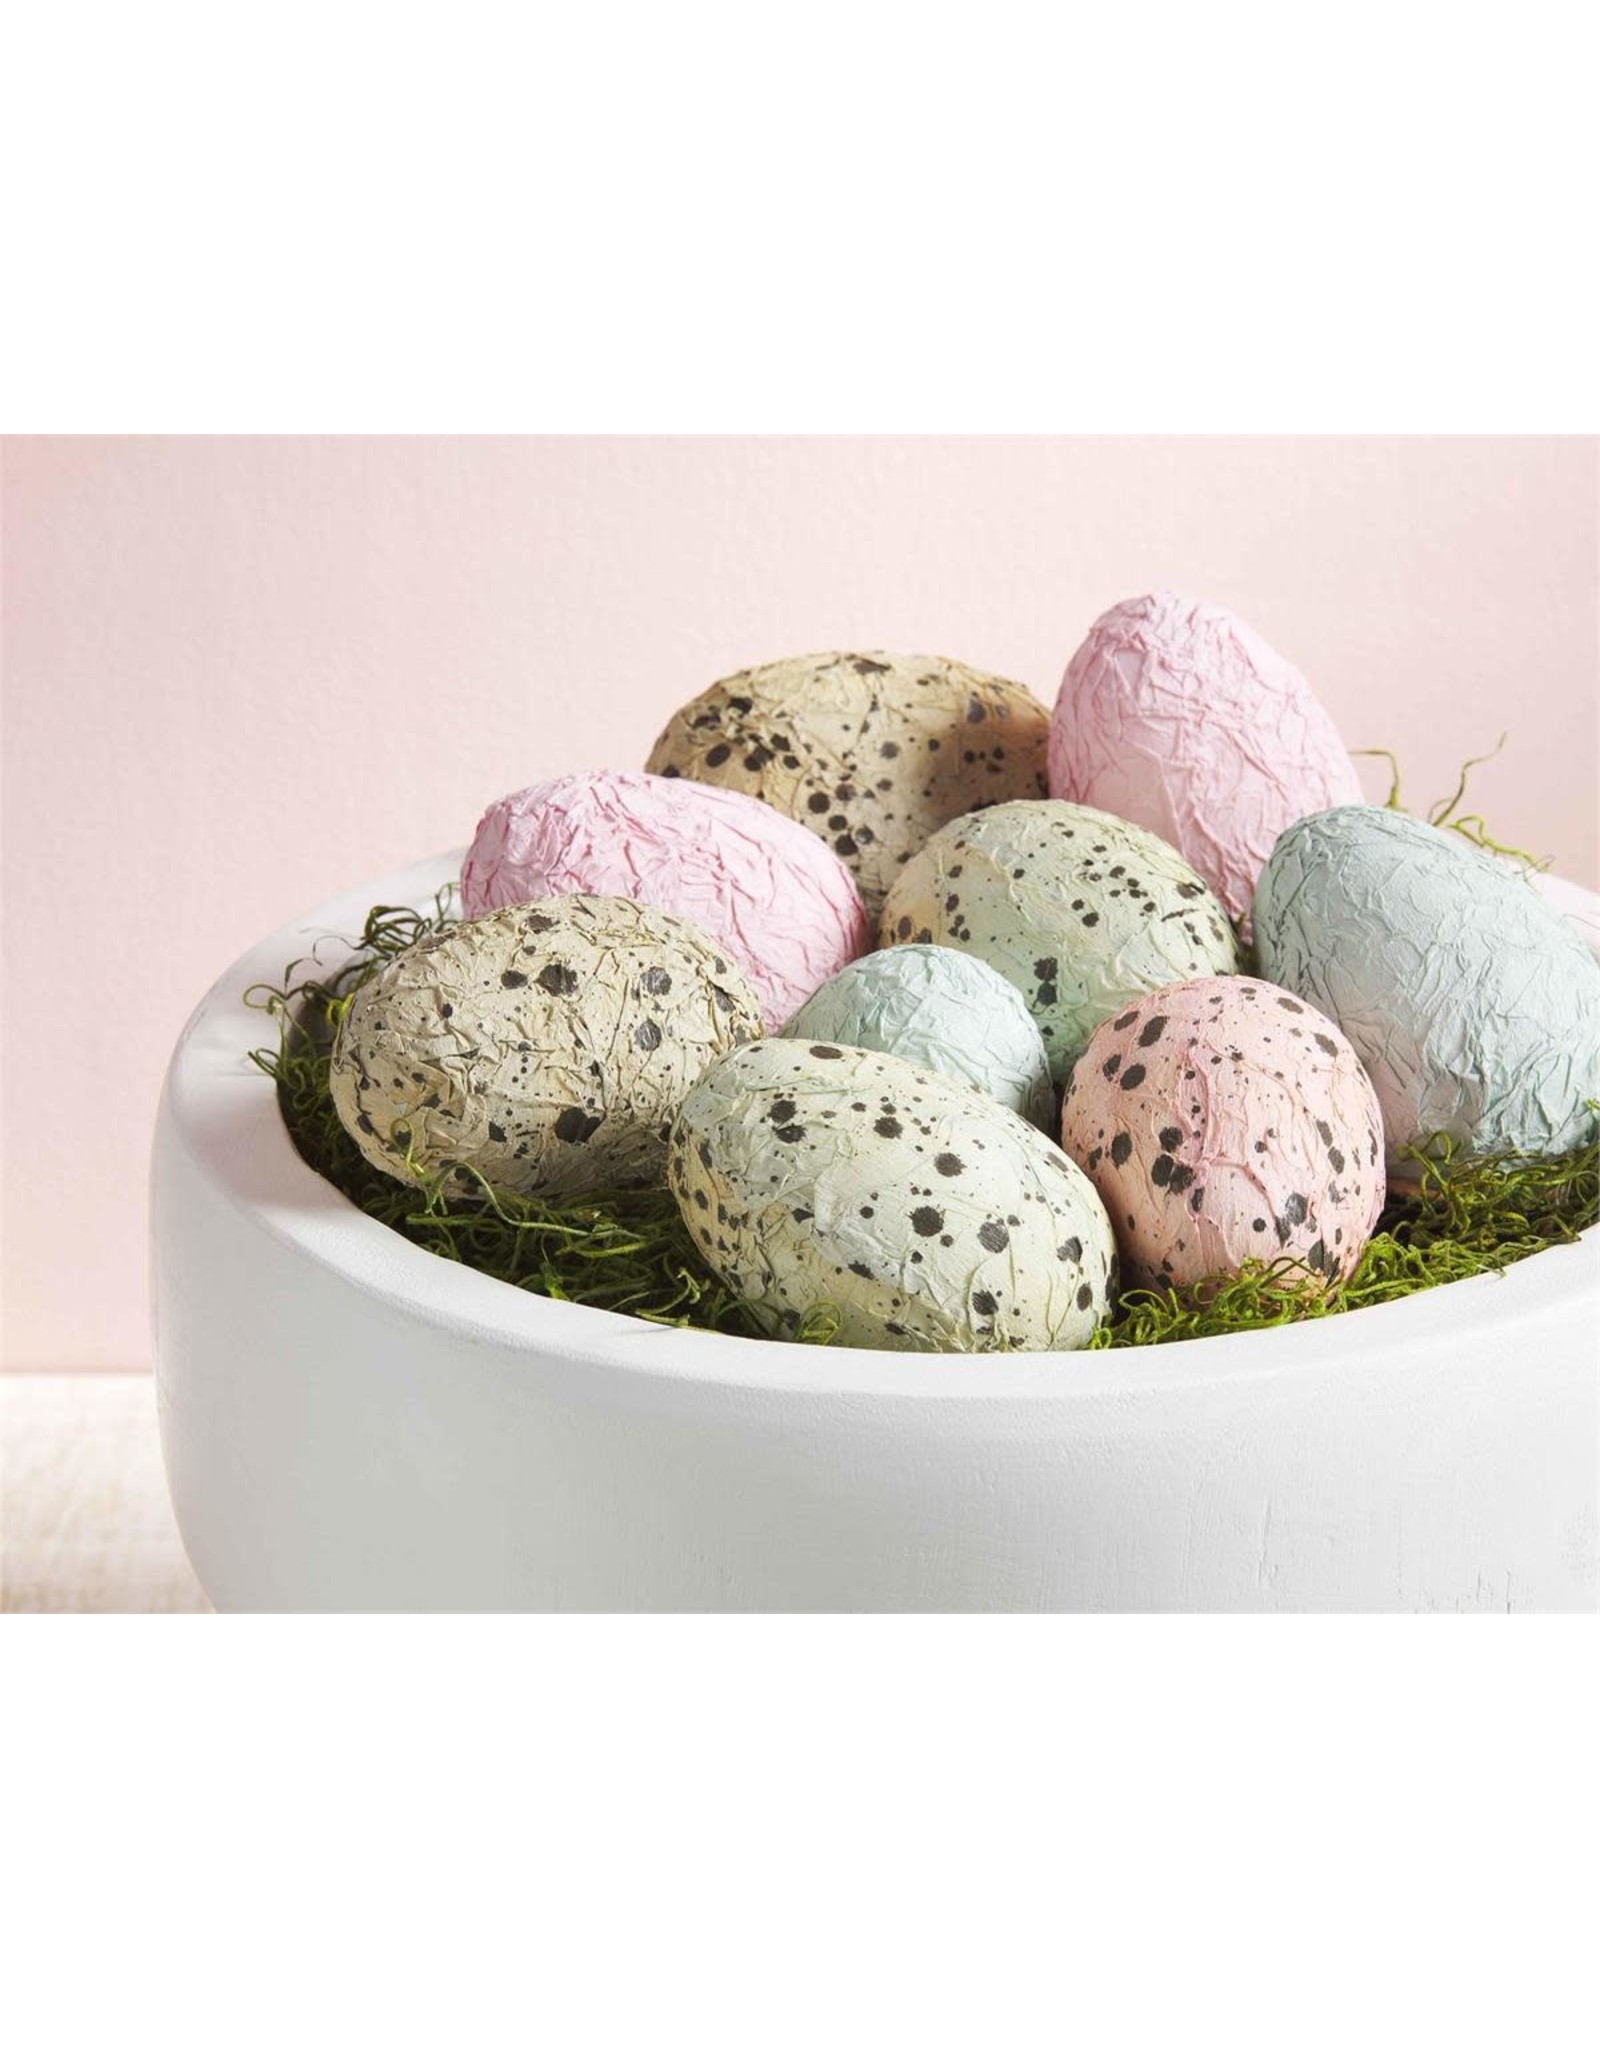 Mud Pie Paper Mache Easter Eggs Pink Speckled Egg